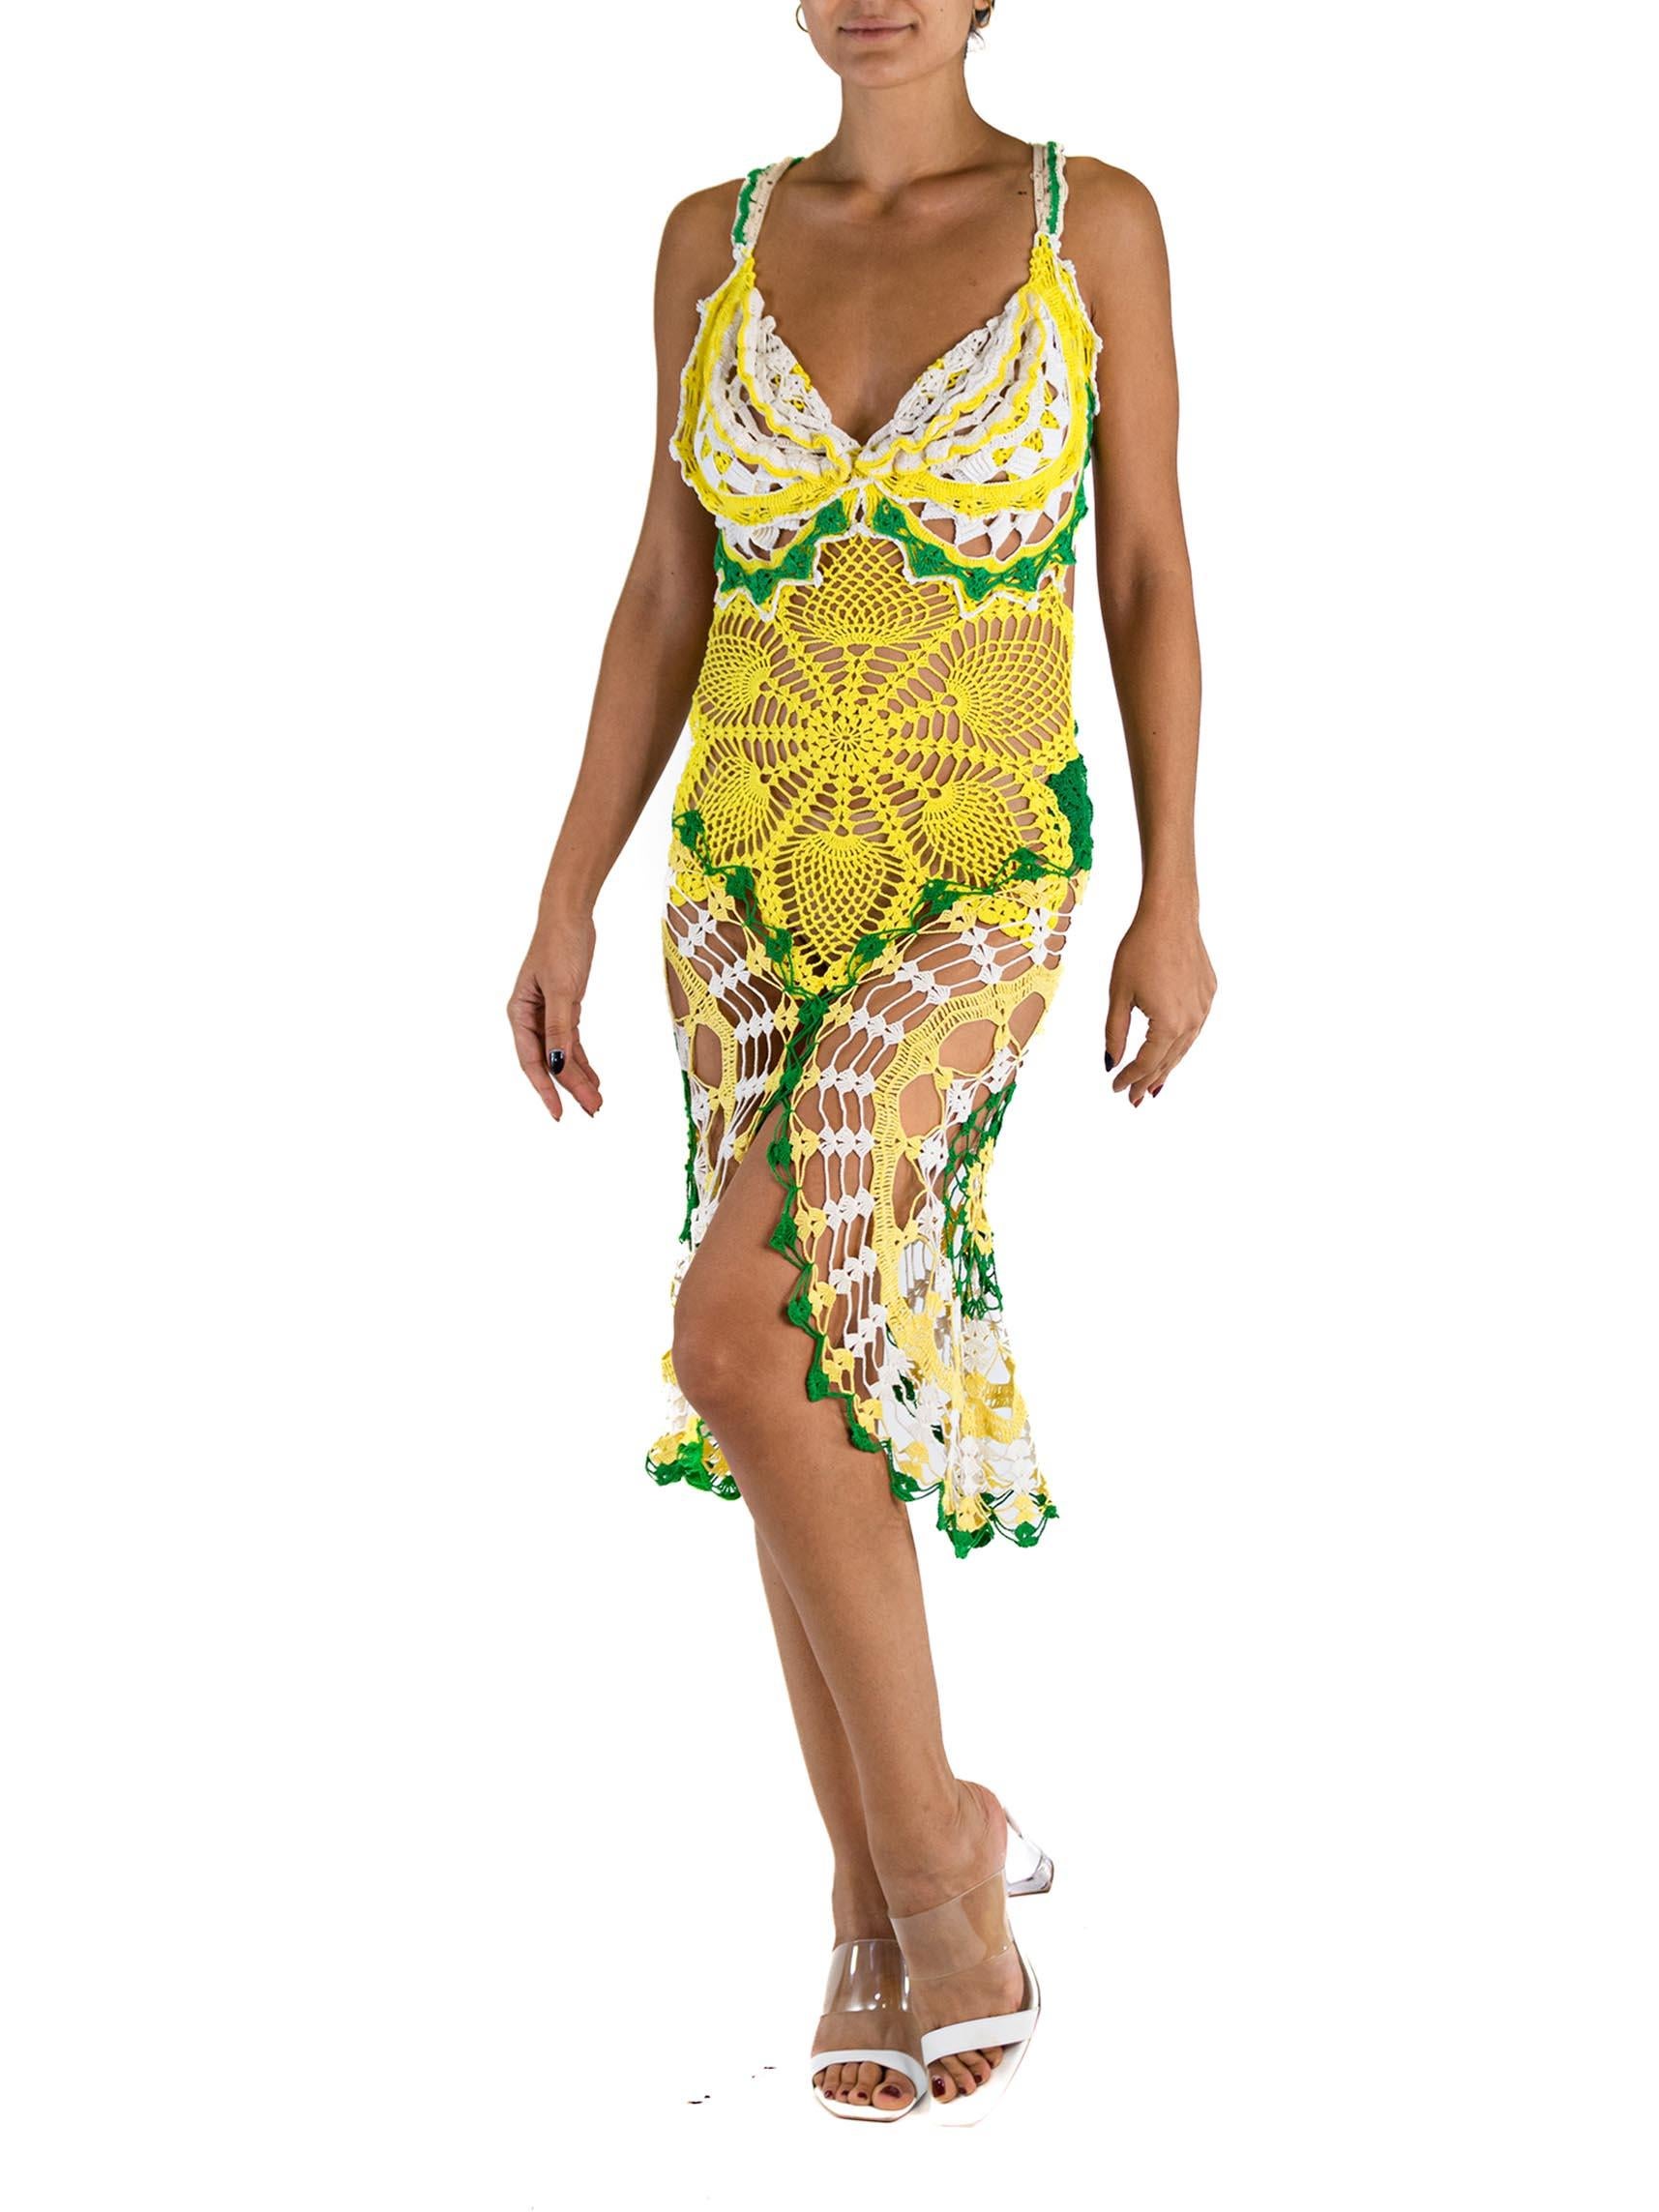 MORPHEW COLLECTION Yellow & Green Cotton Crochet Lace Mid Dress For Sale 3